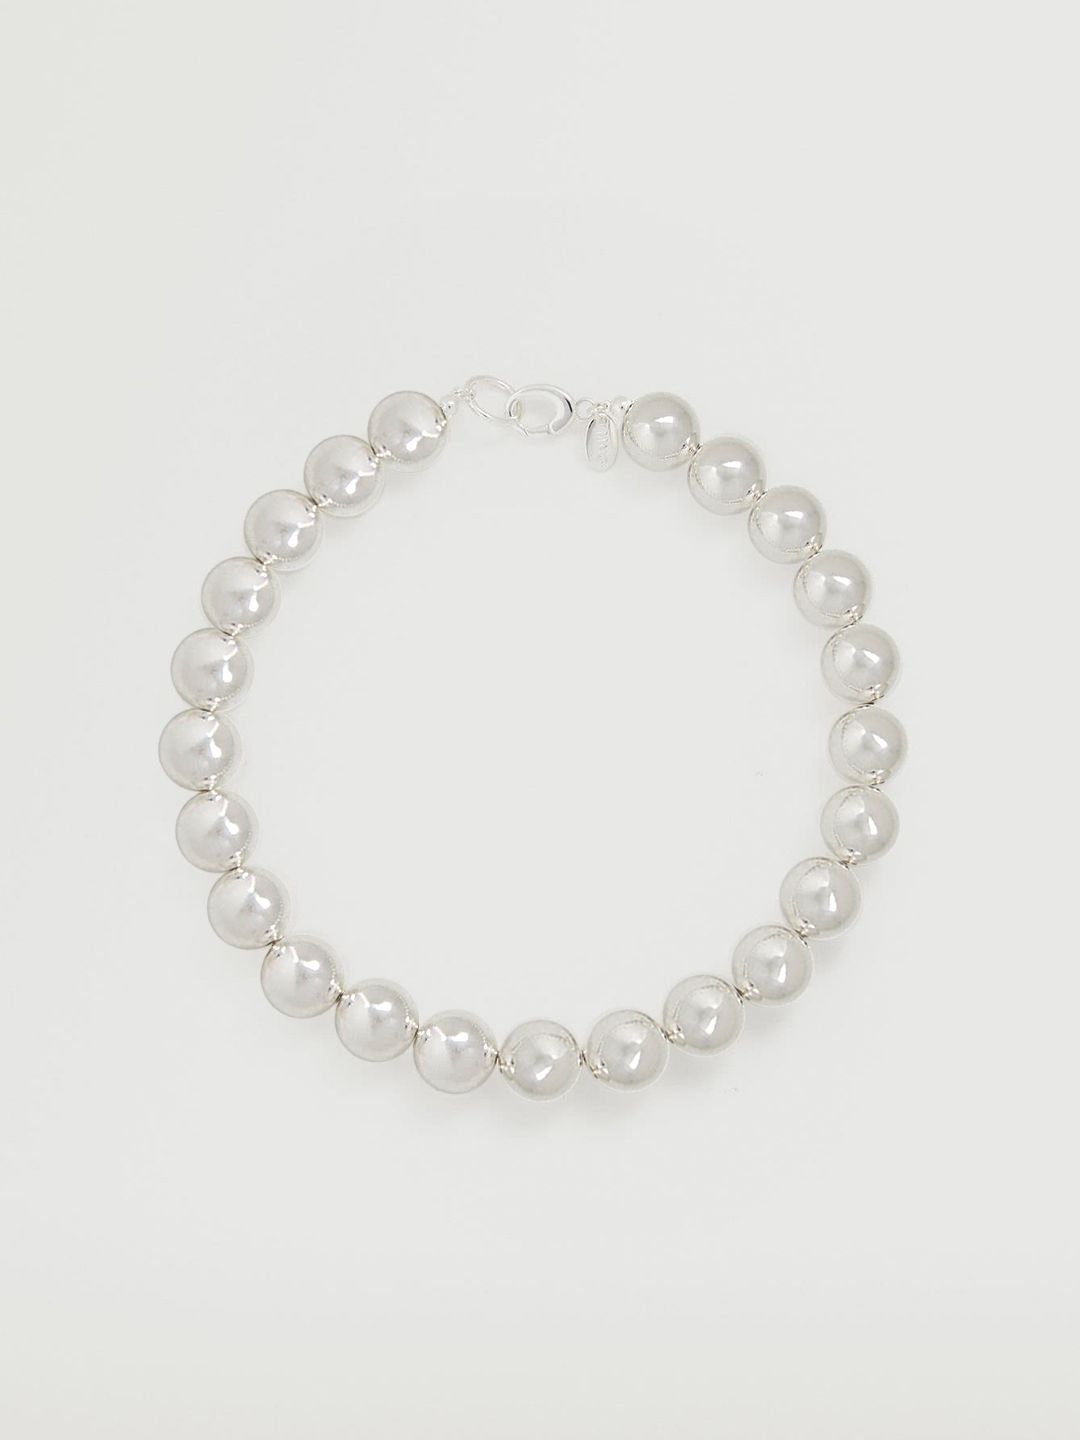 MANGO Silver-Toned Beaded Necklace Price in India